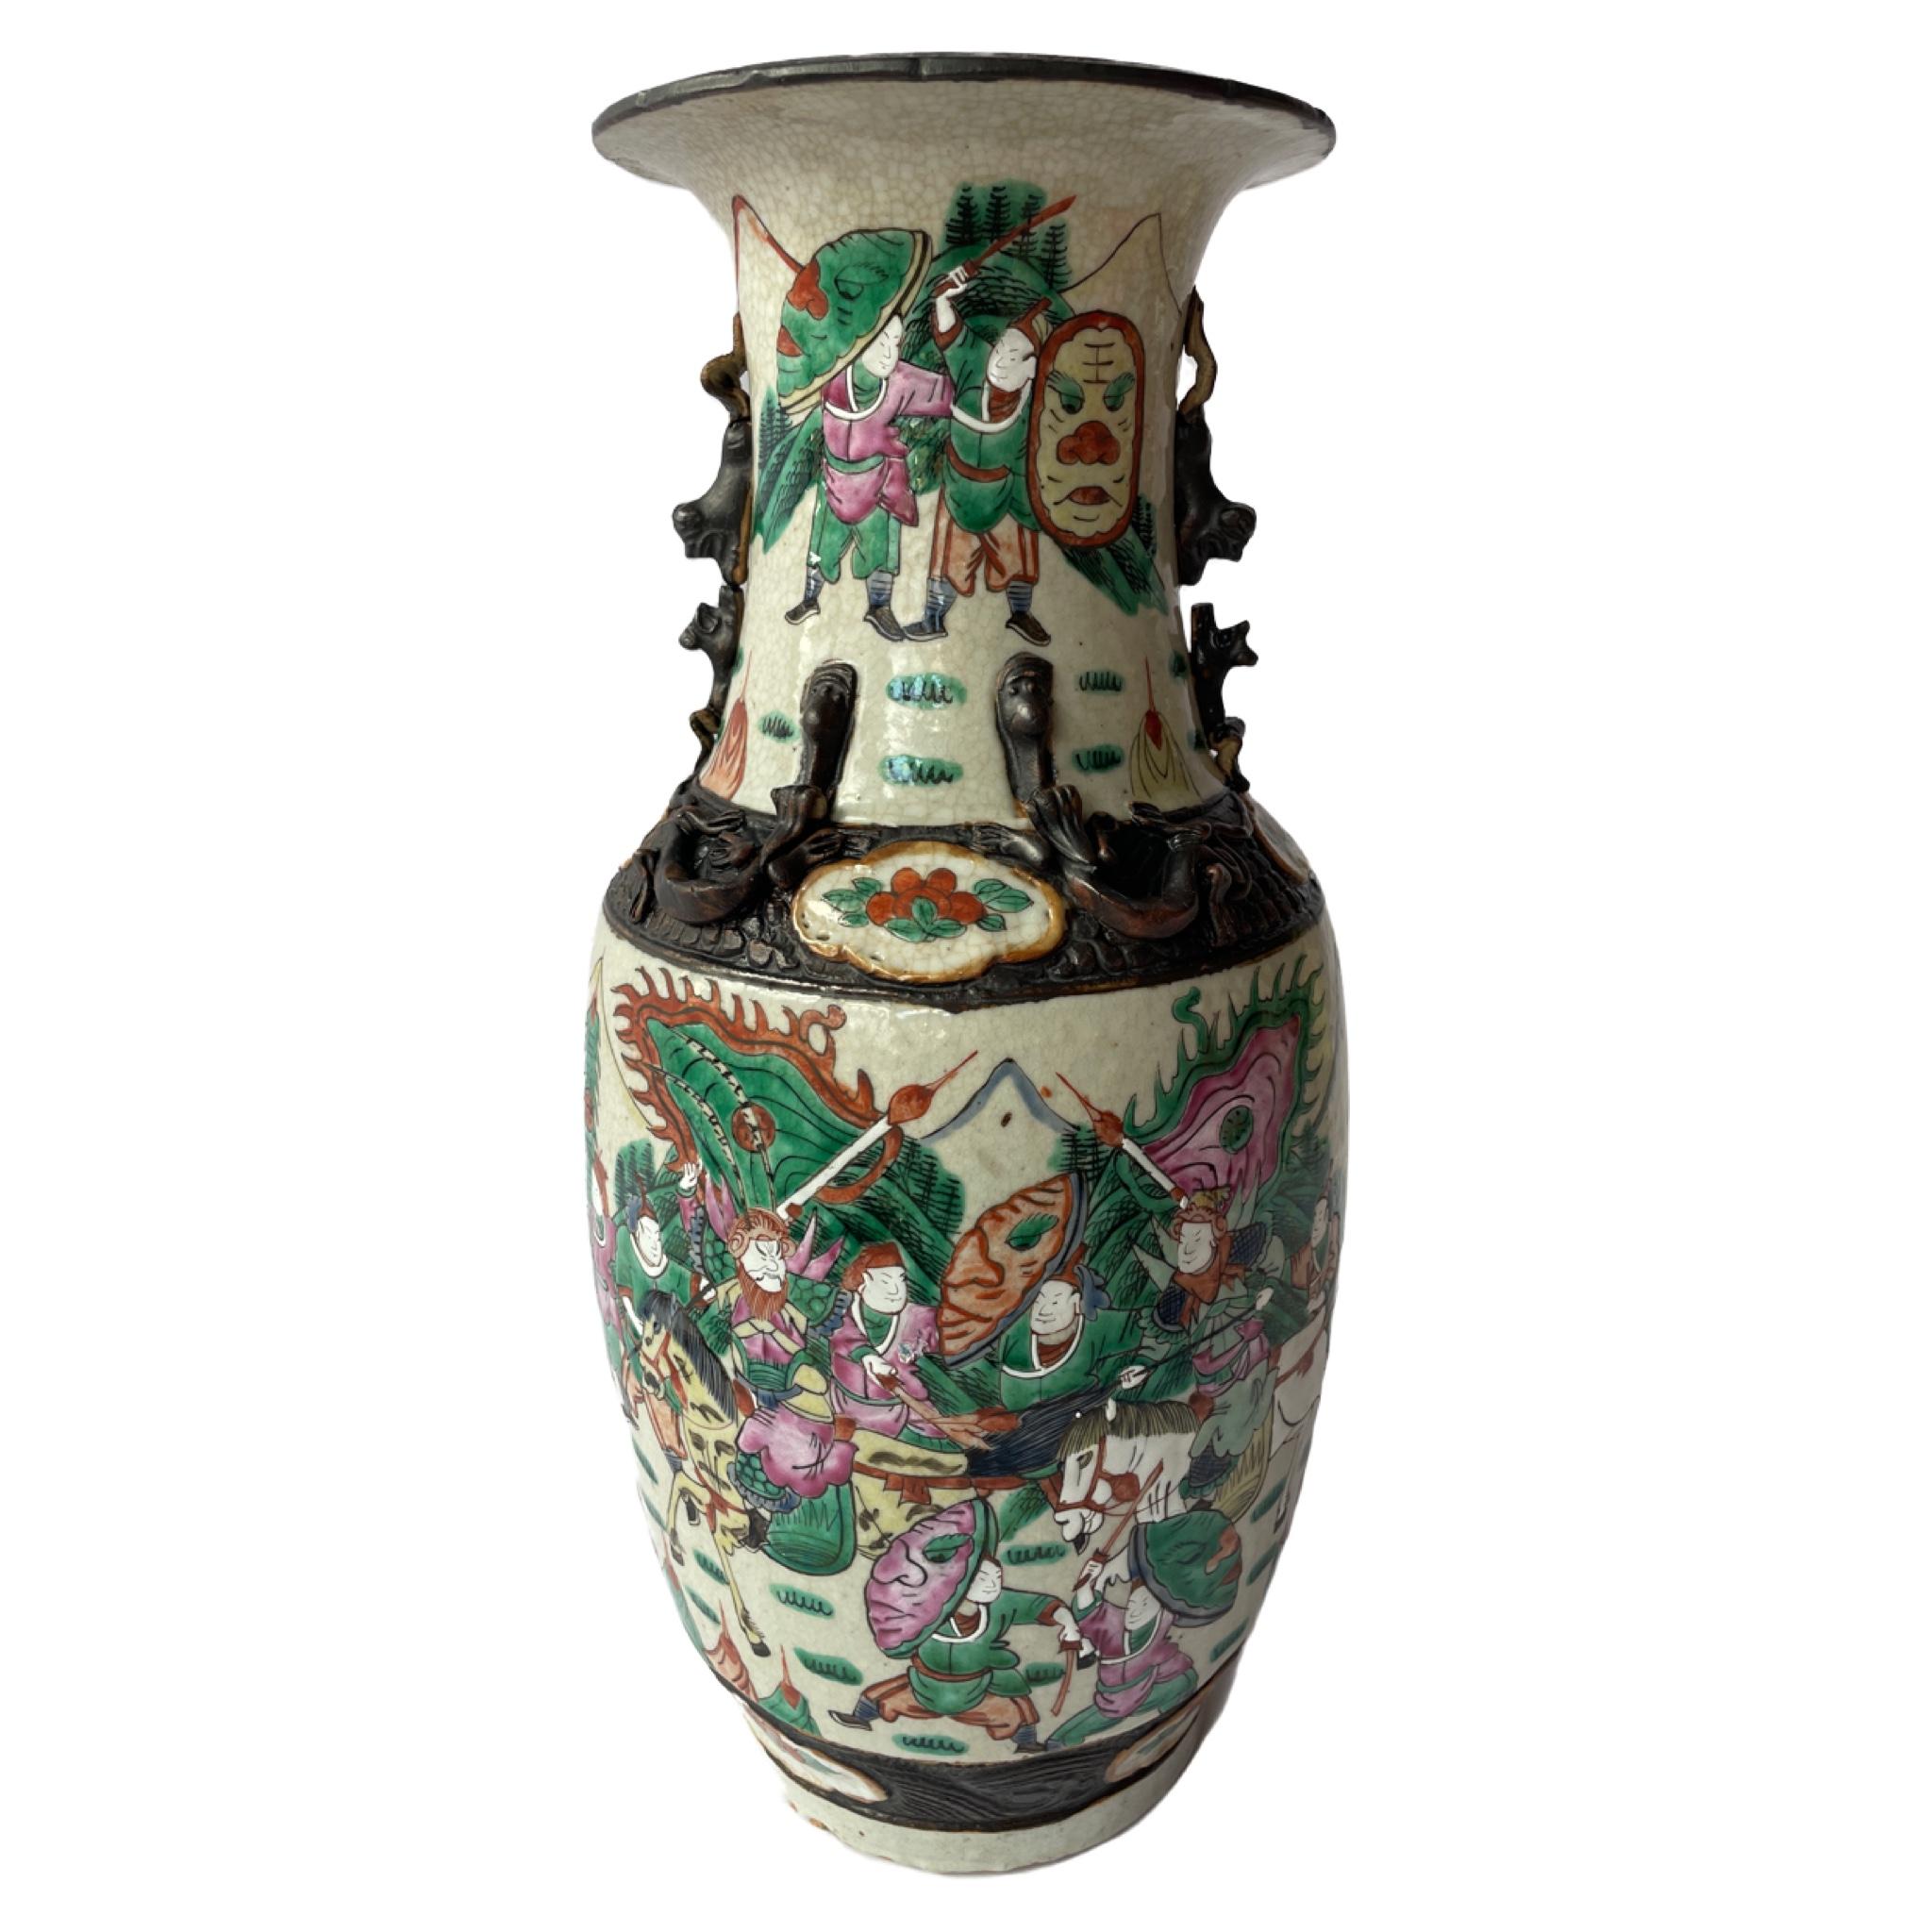 Nanjing Porcelain, also known as Nanking Porcelain and referred to as 